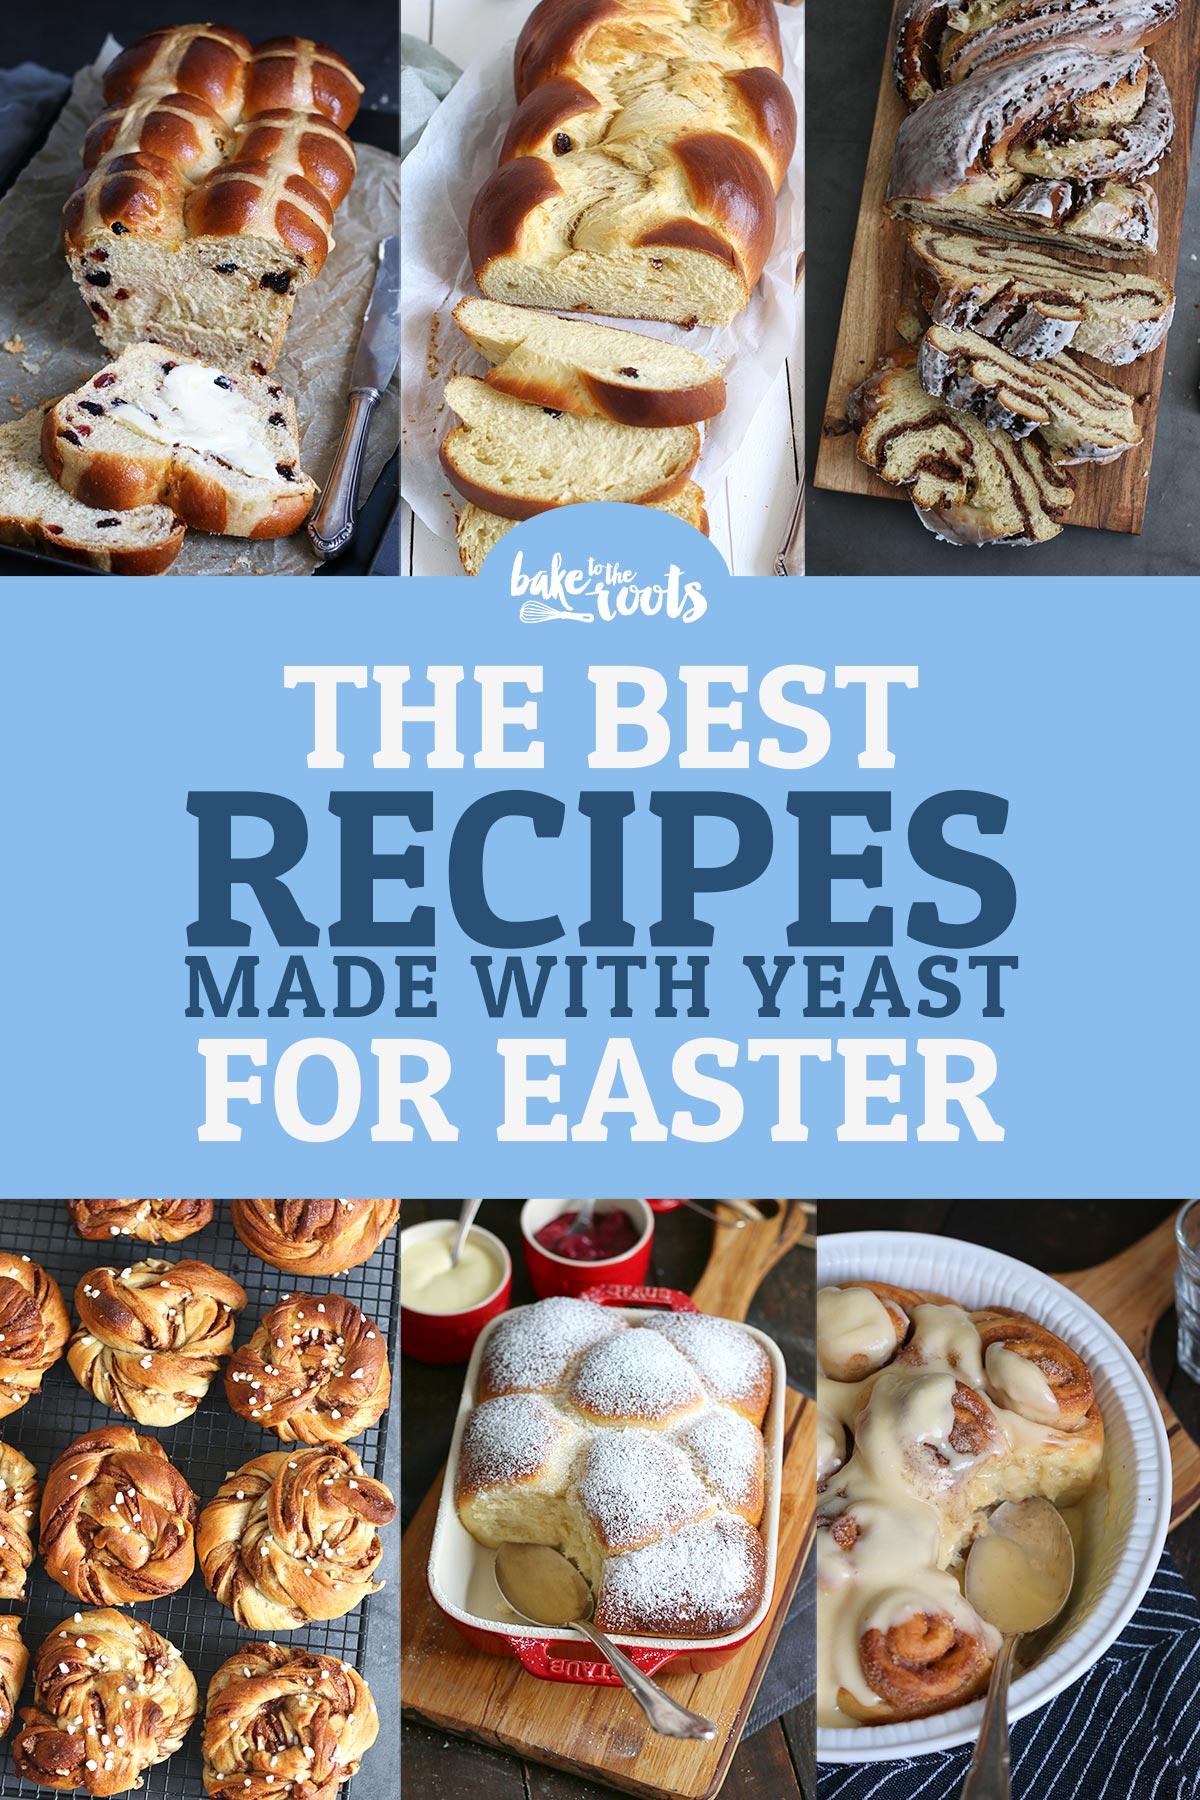 The Best 10 Bakes for Easter (made with yeast)